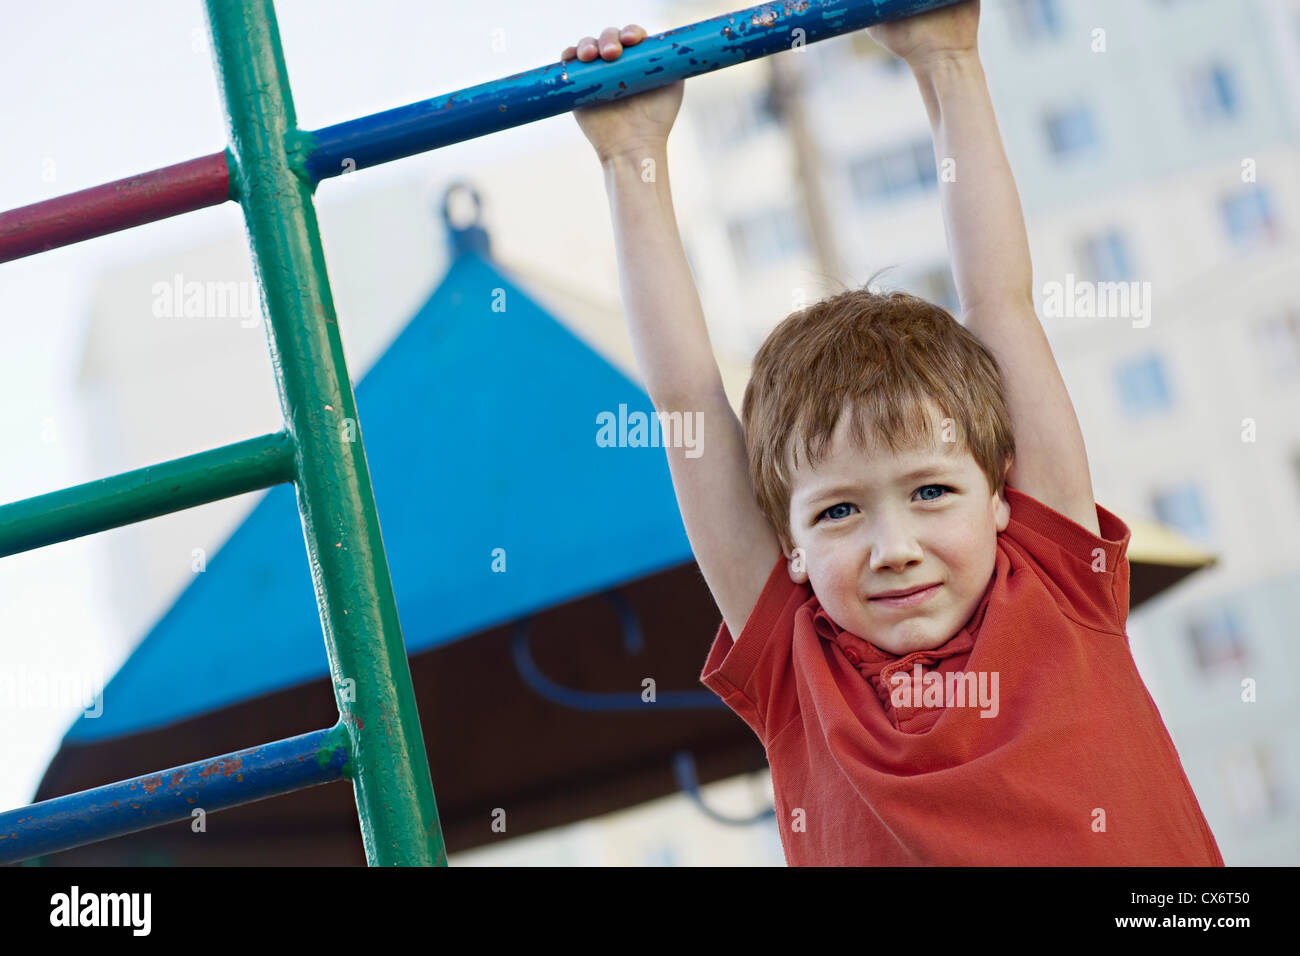 A boy hanging from a playground bar Stock Photo